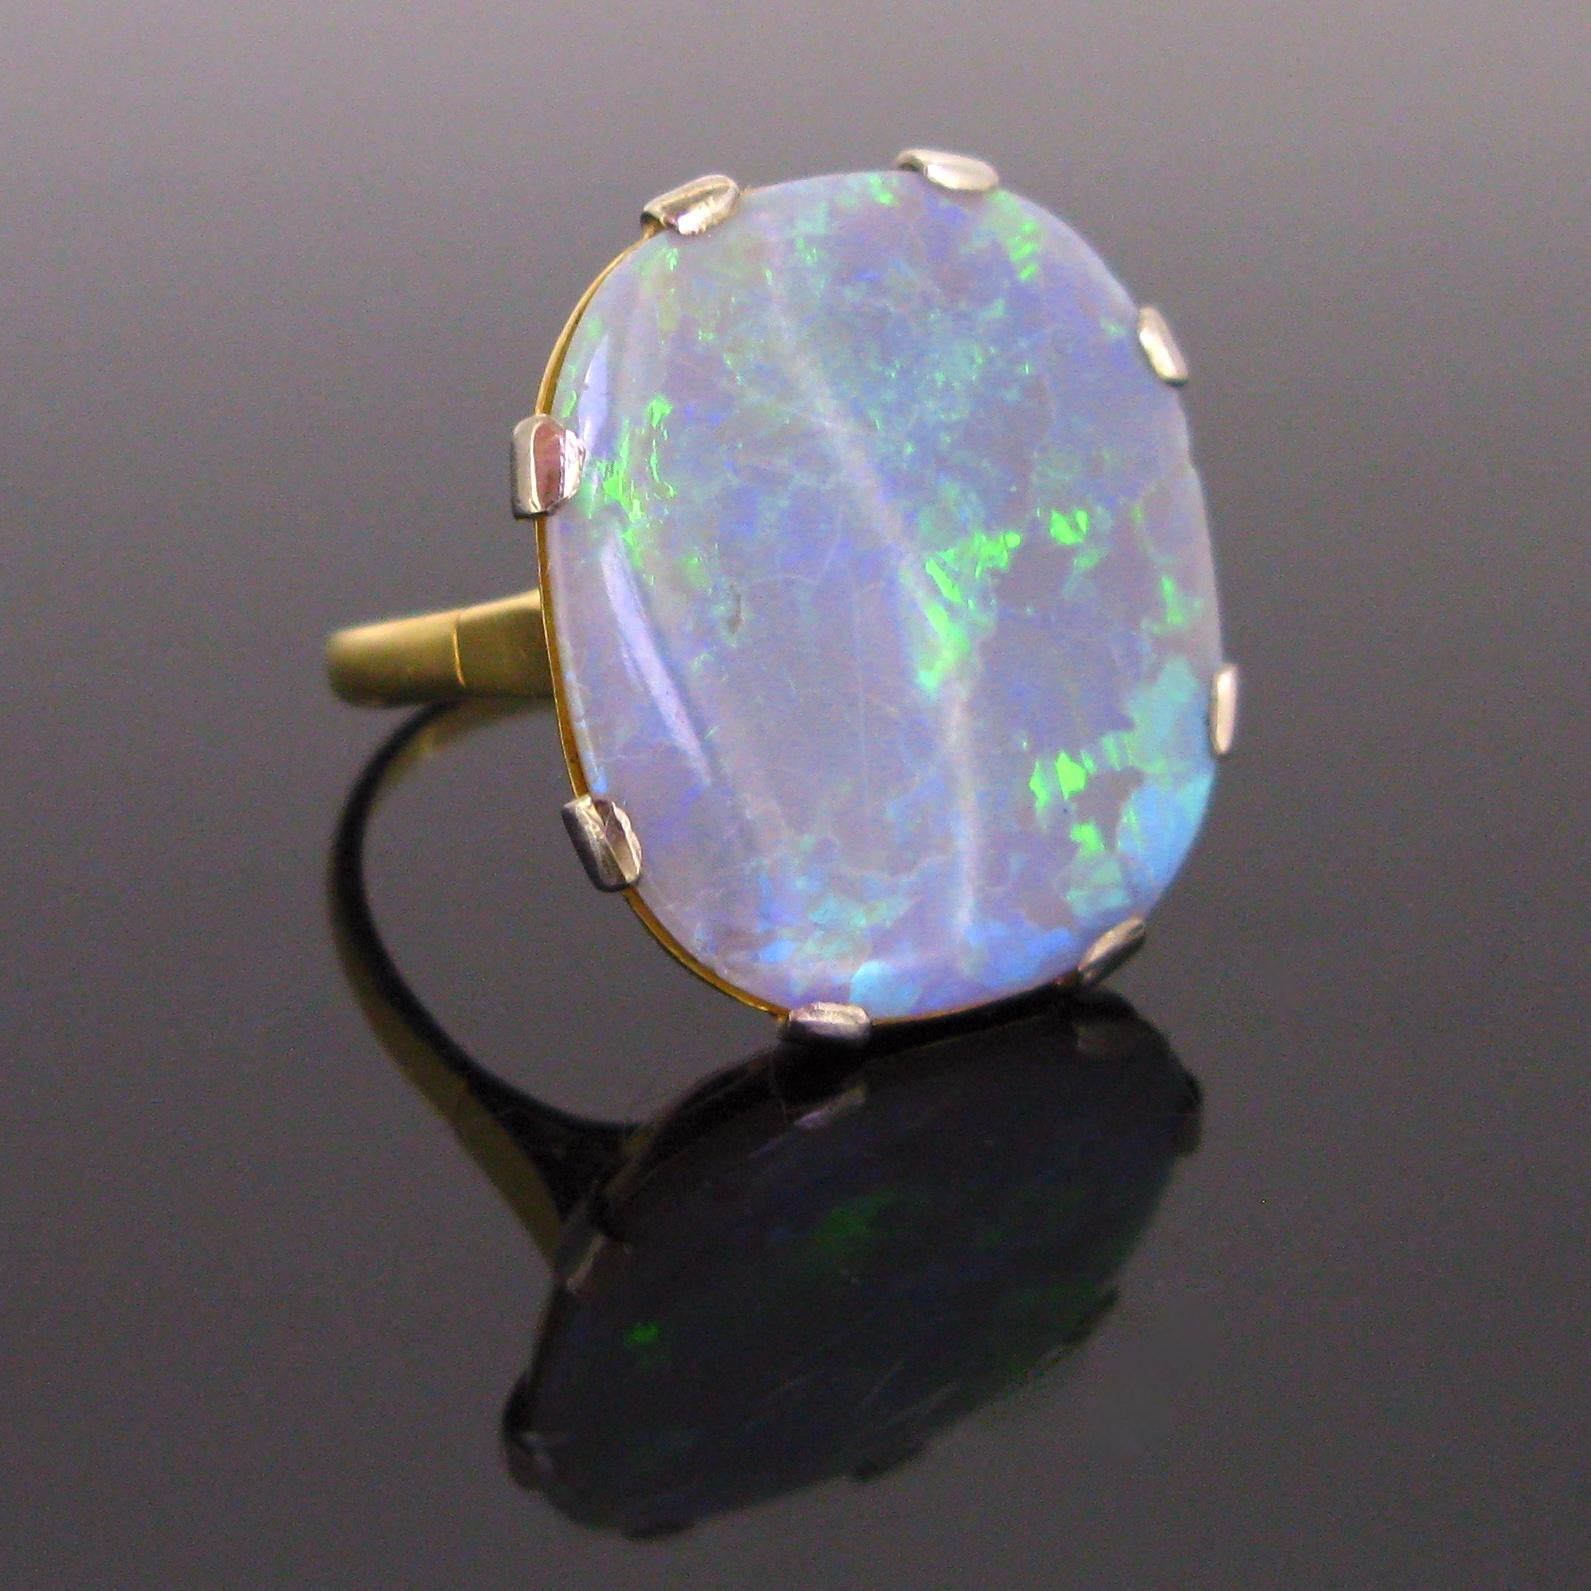 This important ring features an important oval cut opal which is set on platinum prongs. The ring is from the Sixties. The opal shows some beautiful fires in the blue and green colours. Opal is the birthstone for the month of October. “Opallios” is